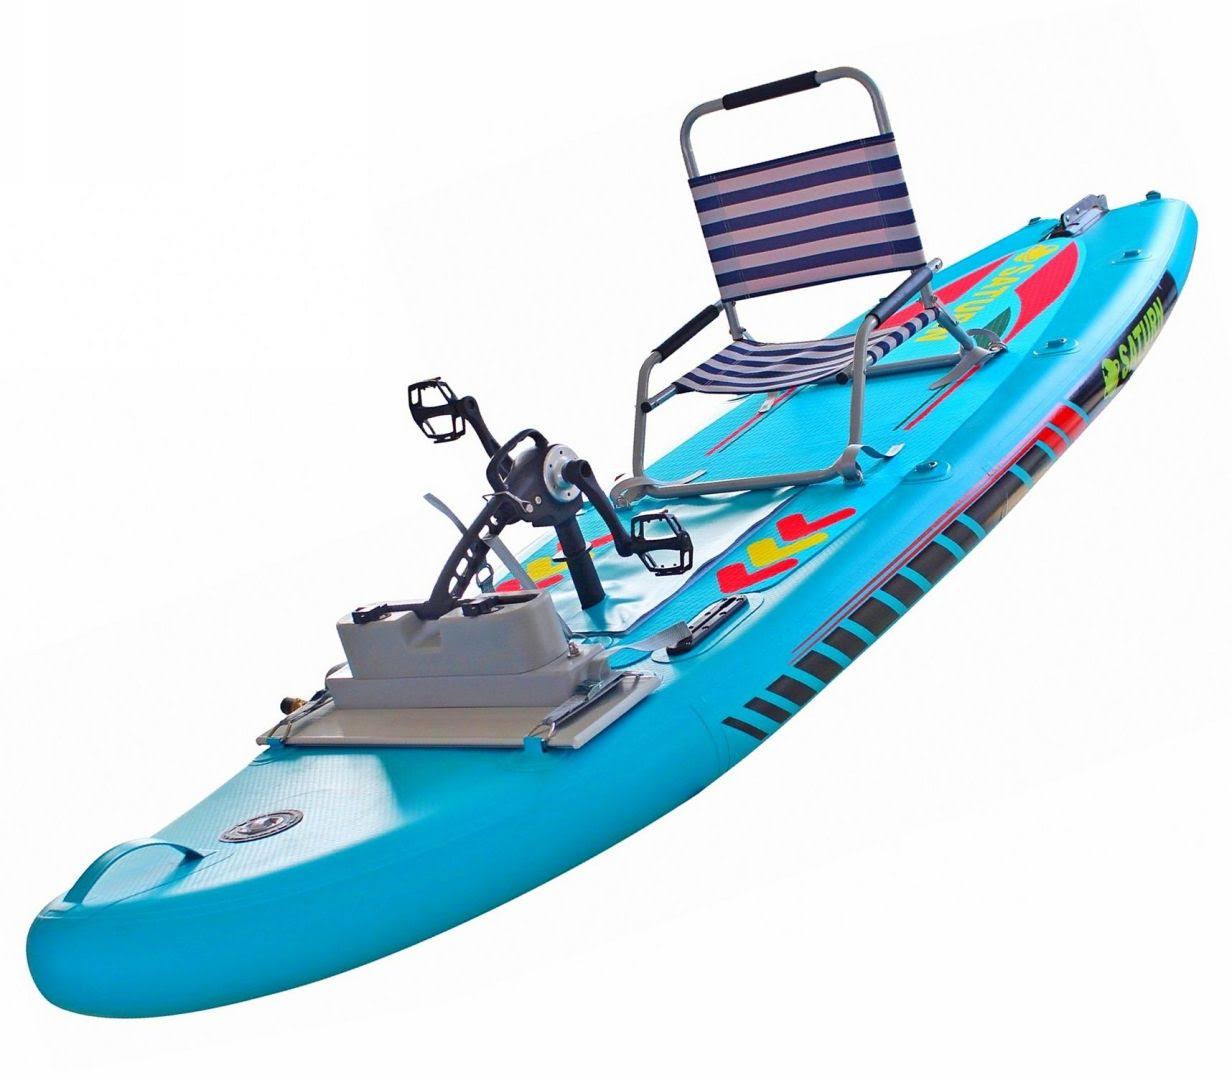 10 Inflatable Pedal Kayak Sup Board. Pedal Drive Included. Inflatable Kayaks On Sale